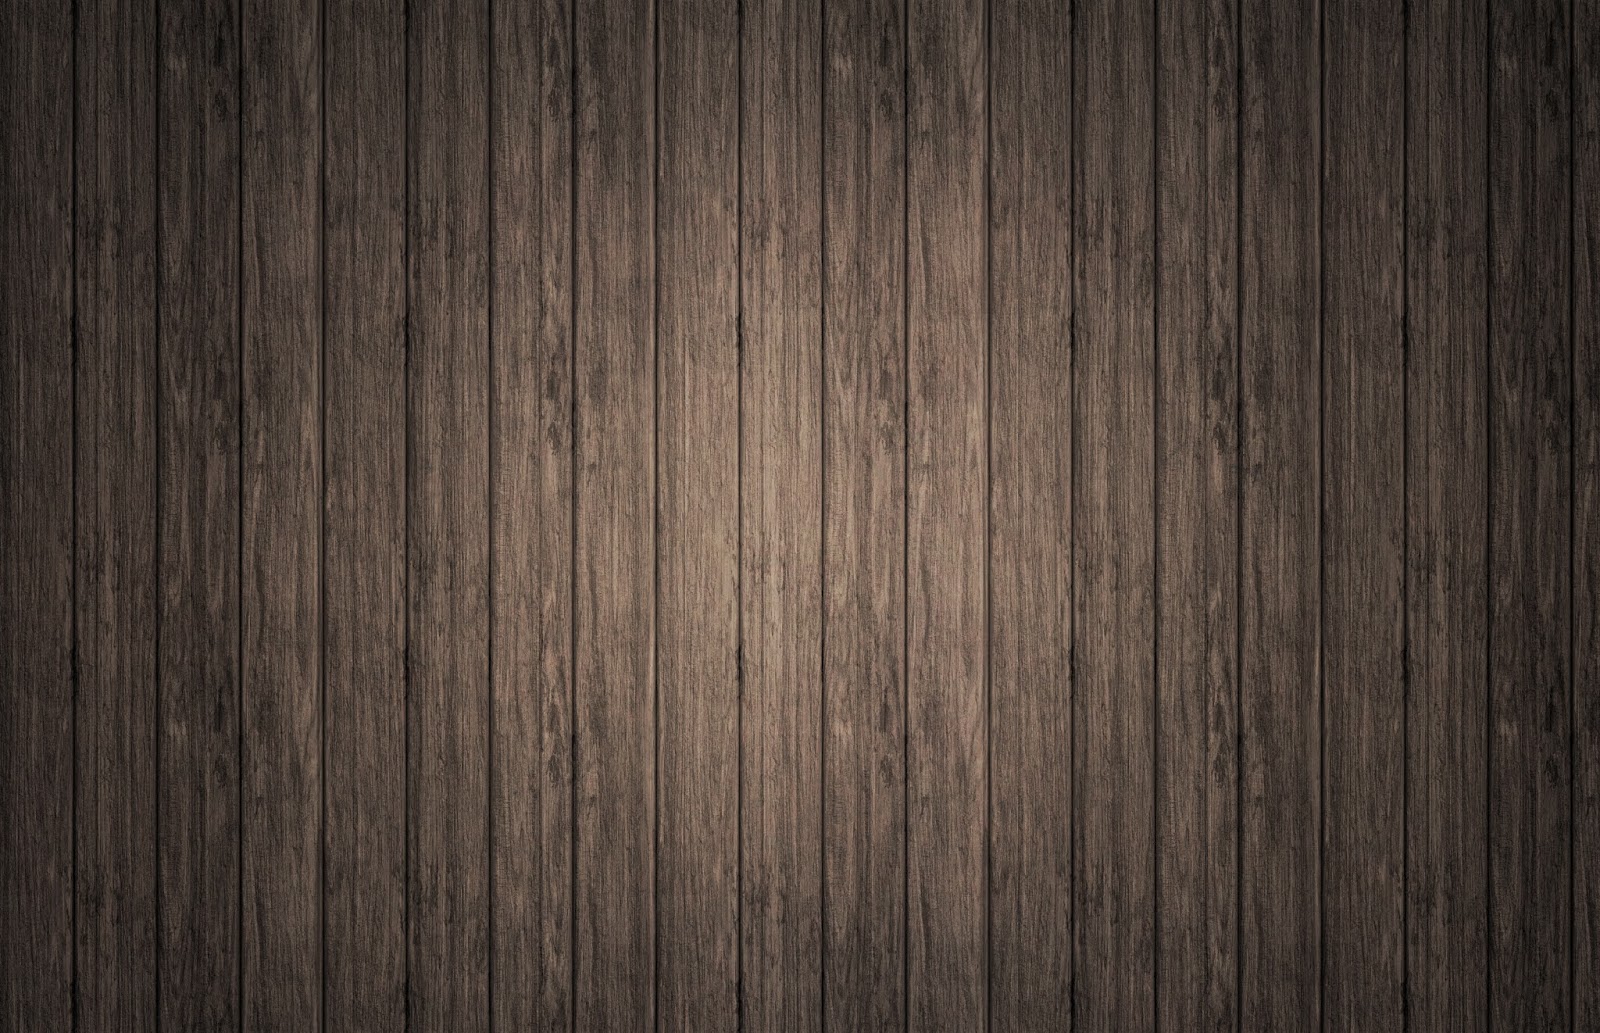 Wooden Background Texture Pattern Image For Website HD Template Psd